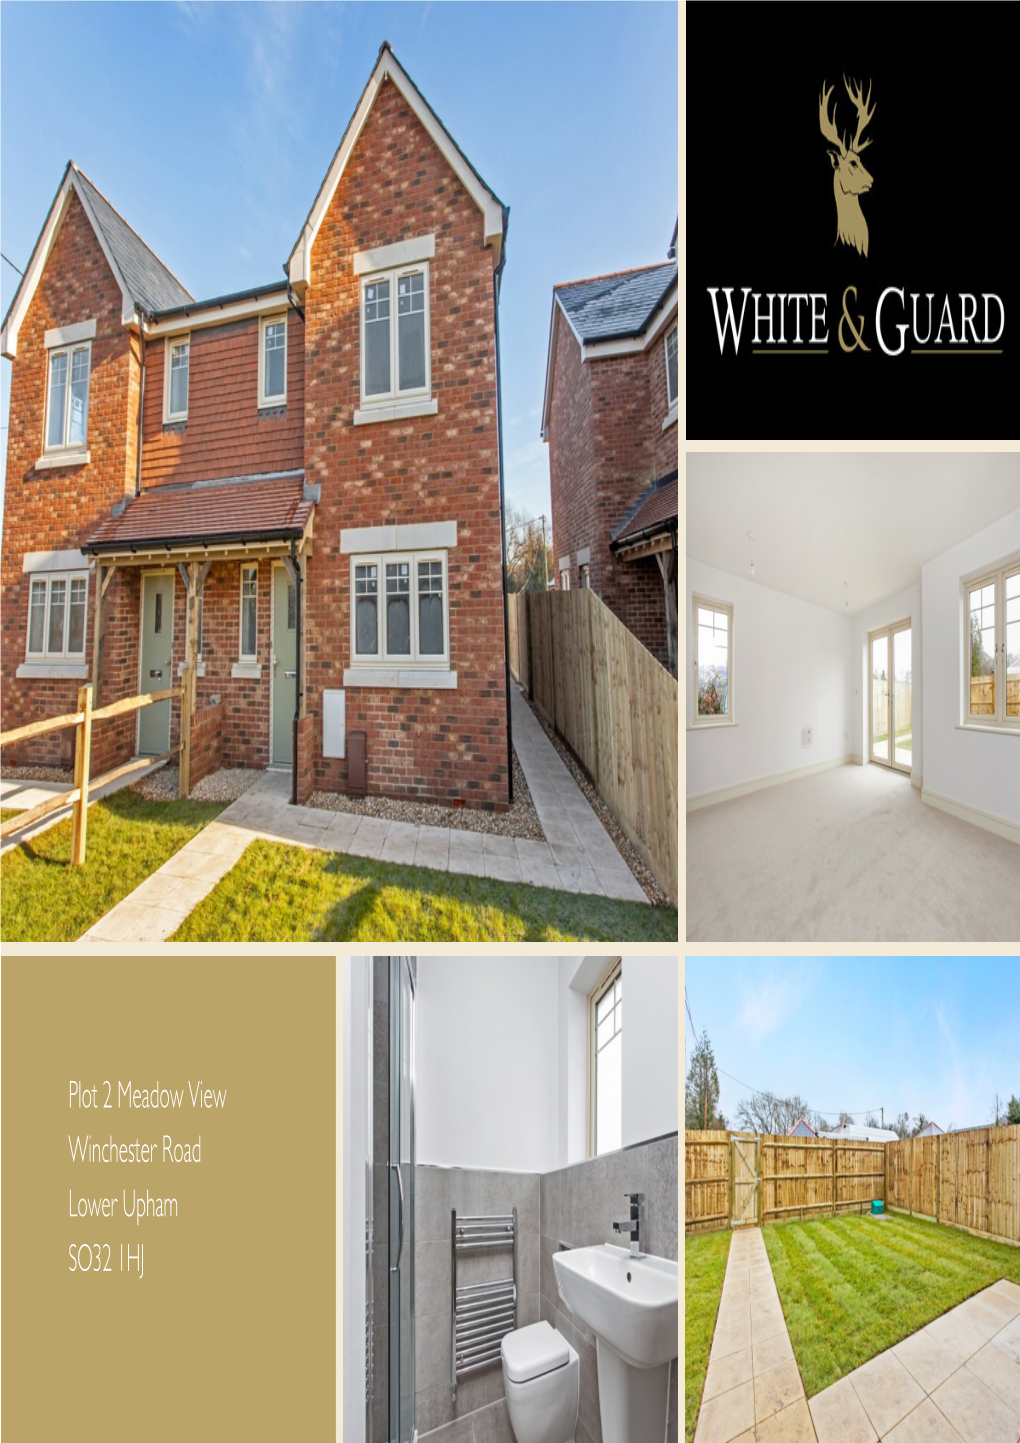 Plot 2 Meadow View Winchester Road Lower Upham SO32 1HJ